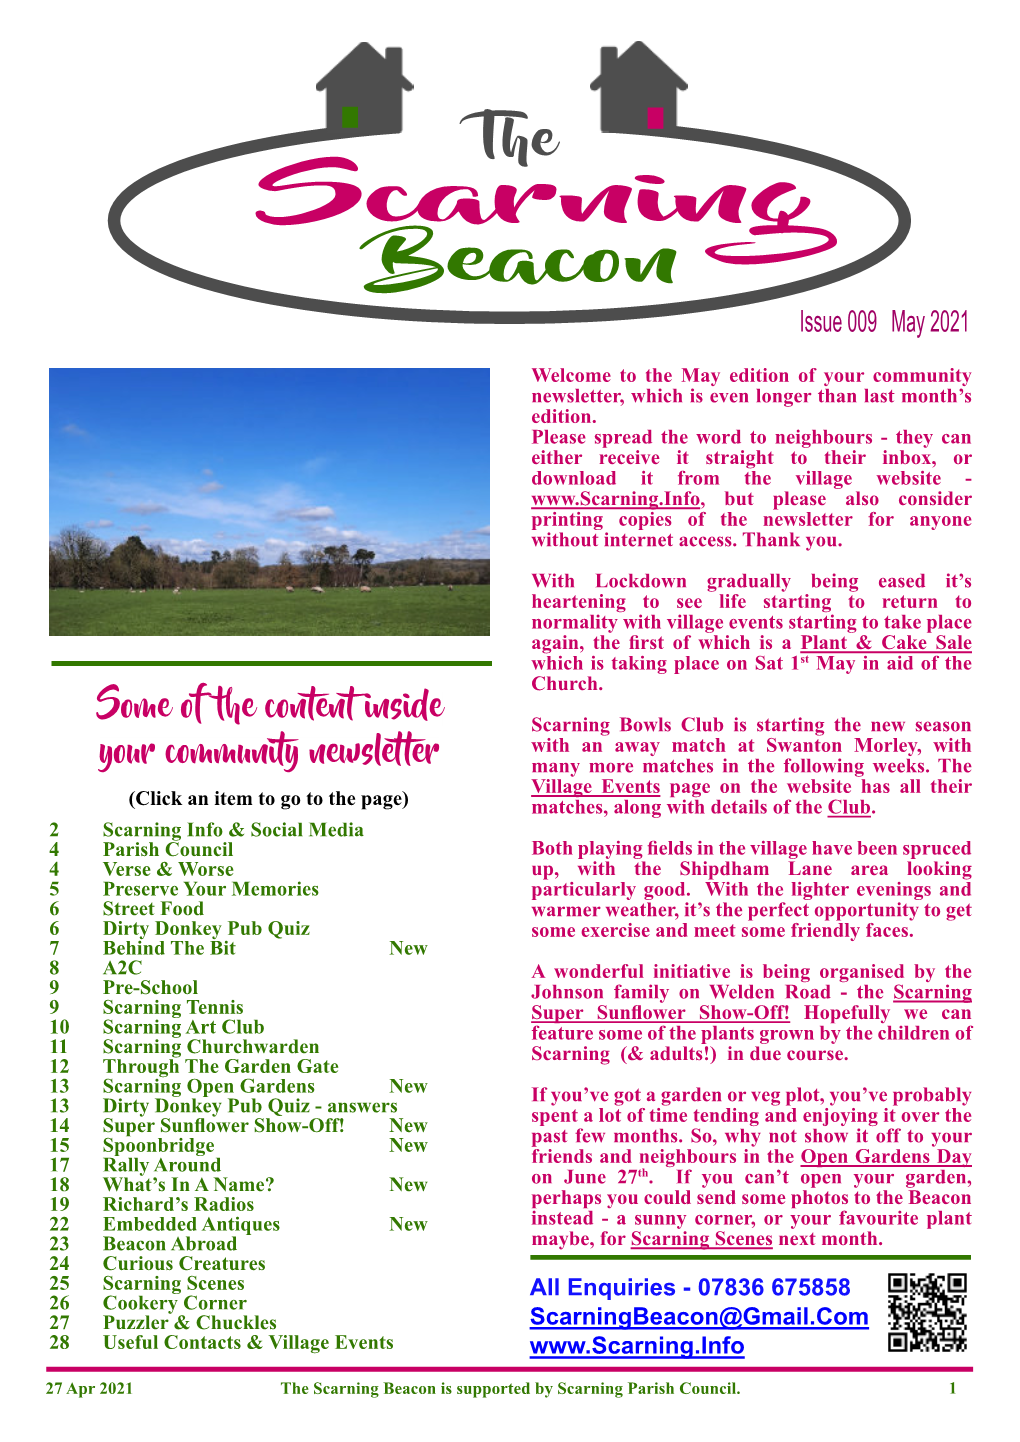 The Scarning Beacon Issue 009 May 2021